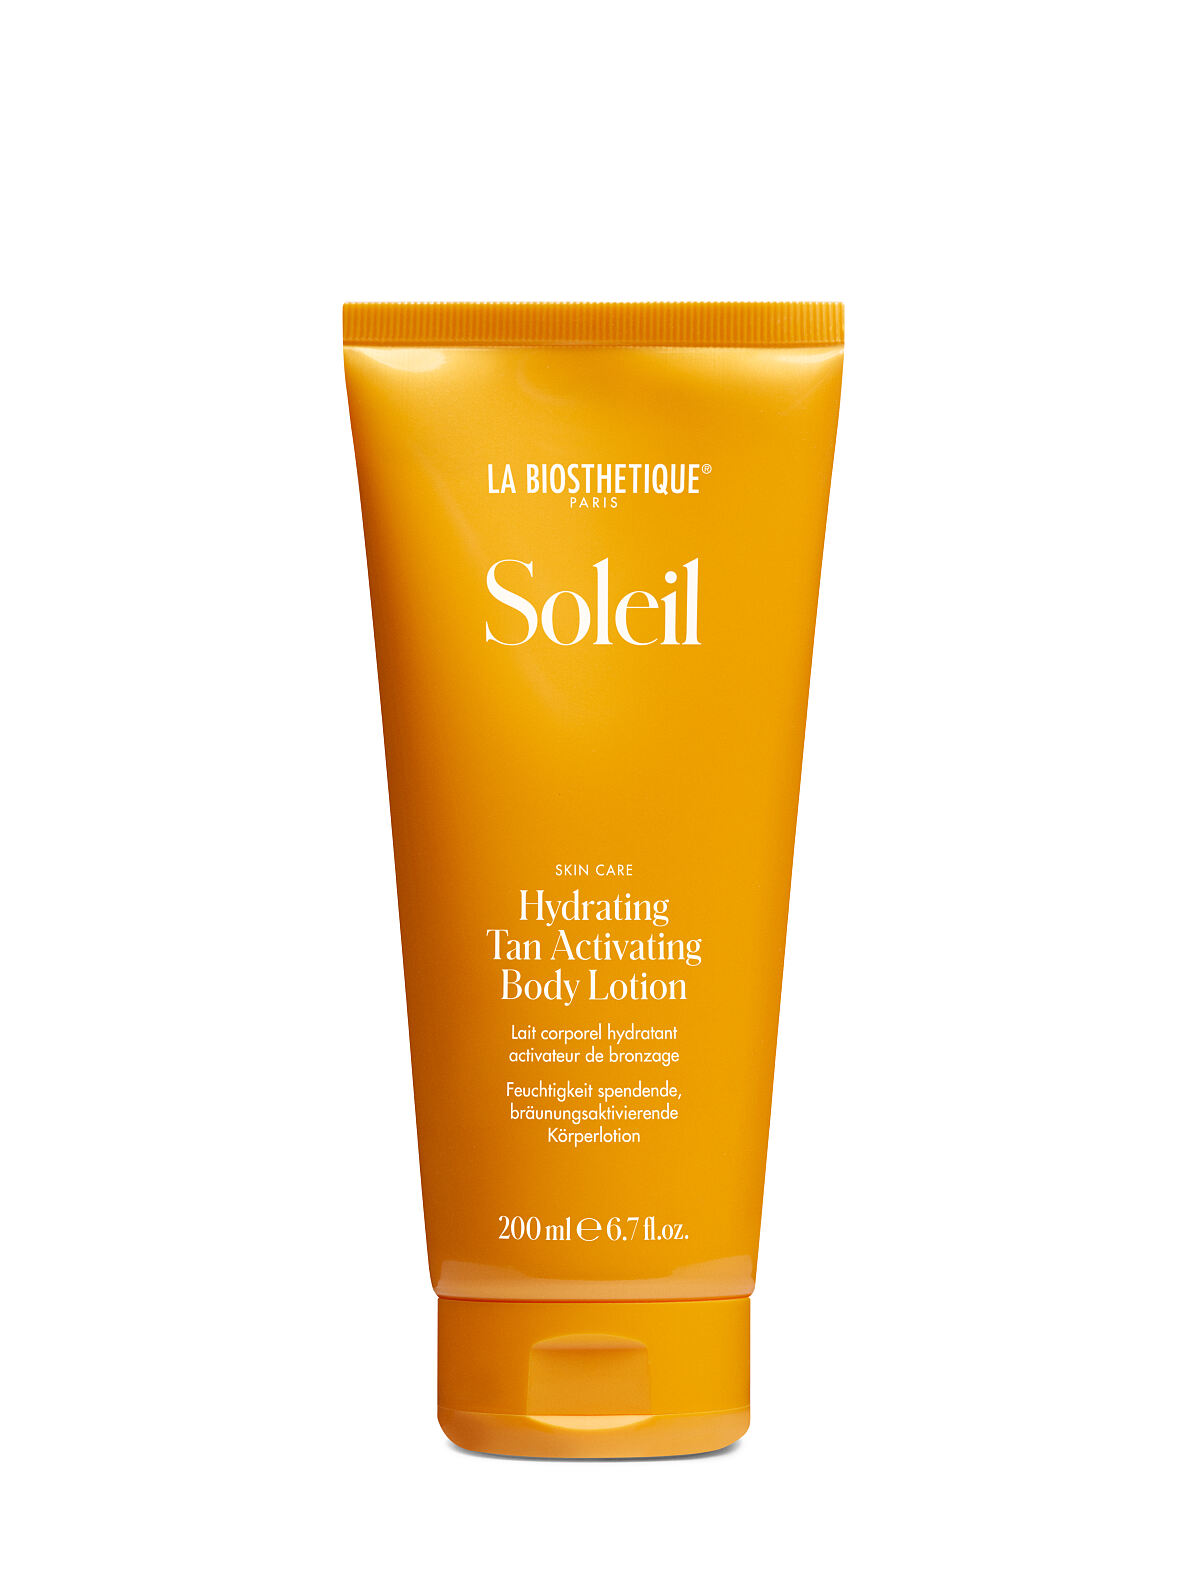 La Biosthétique_Skin-Soleil-002035-Hydrating-Tan-Activating-Body-Lotion-200ml-EUR 31,00